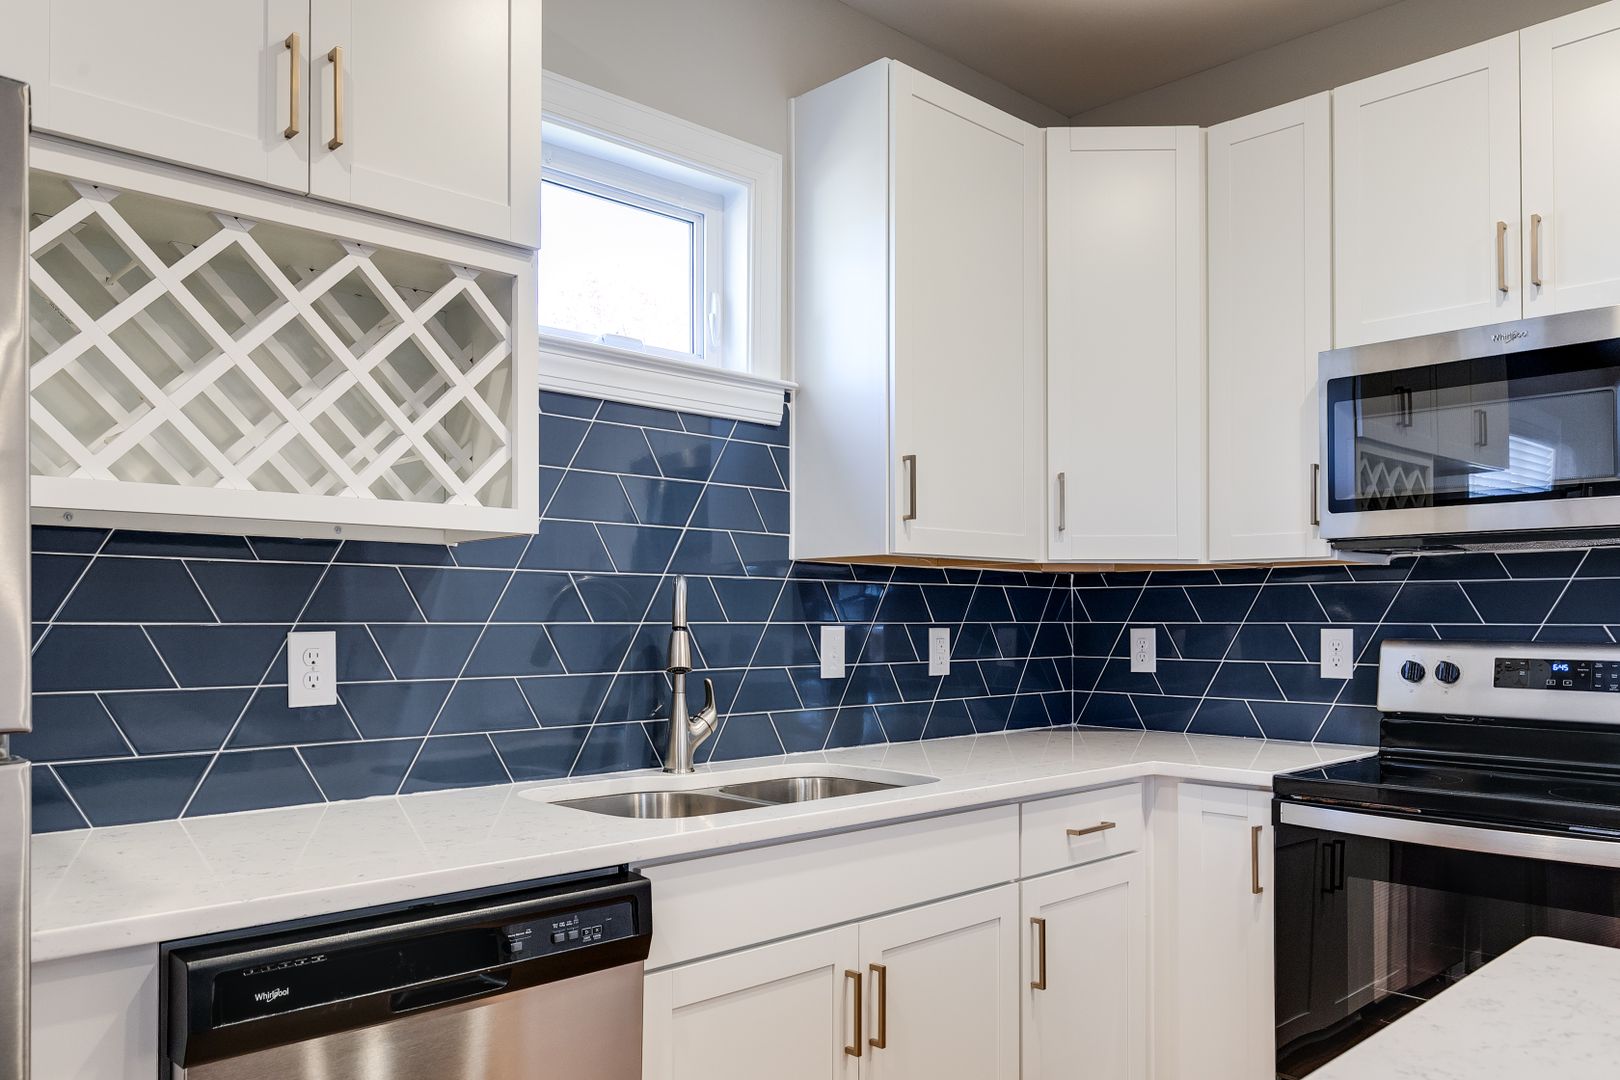 NEW CONSTRUCTION ALERT: Two-Bedroom w/ Finishes so Hot, they just melted!